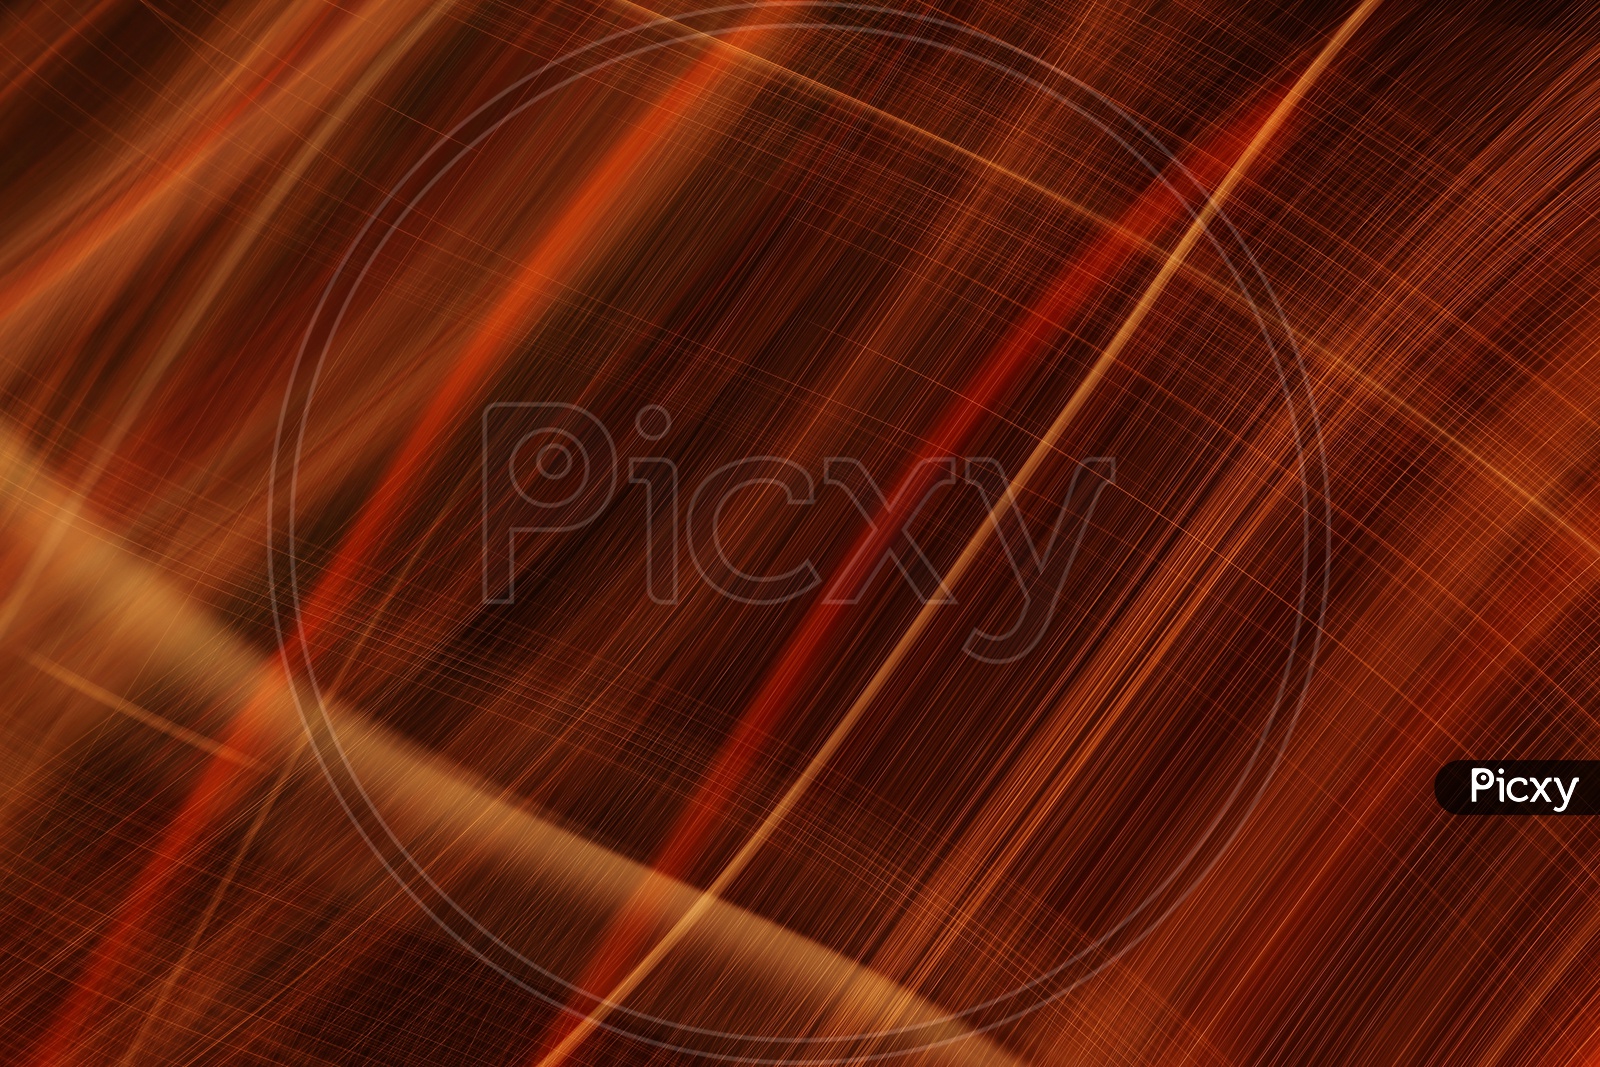 Abstract light trail pattern background